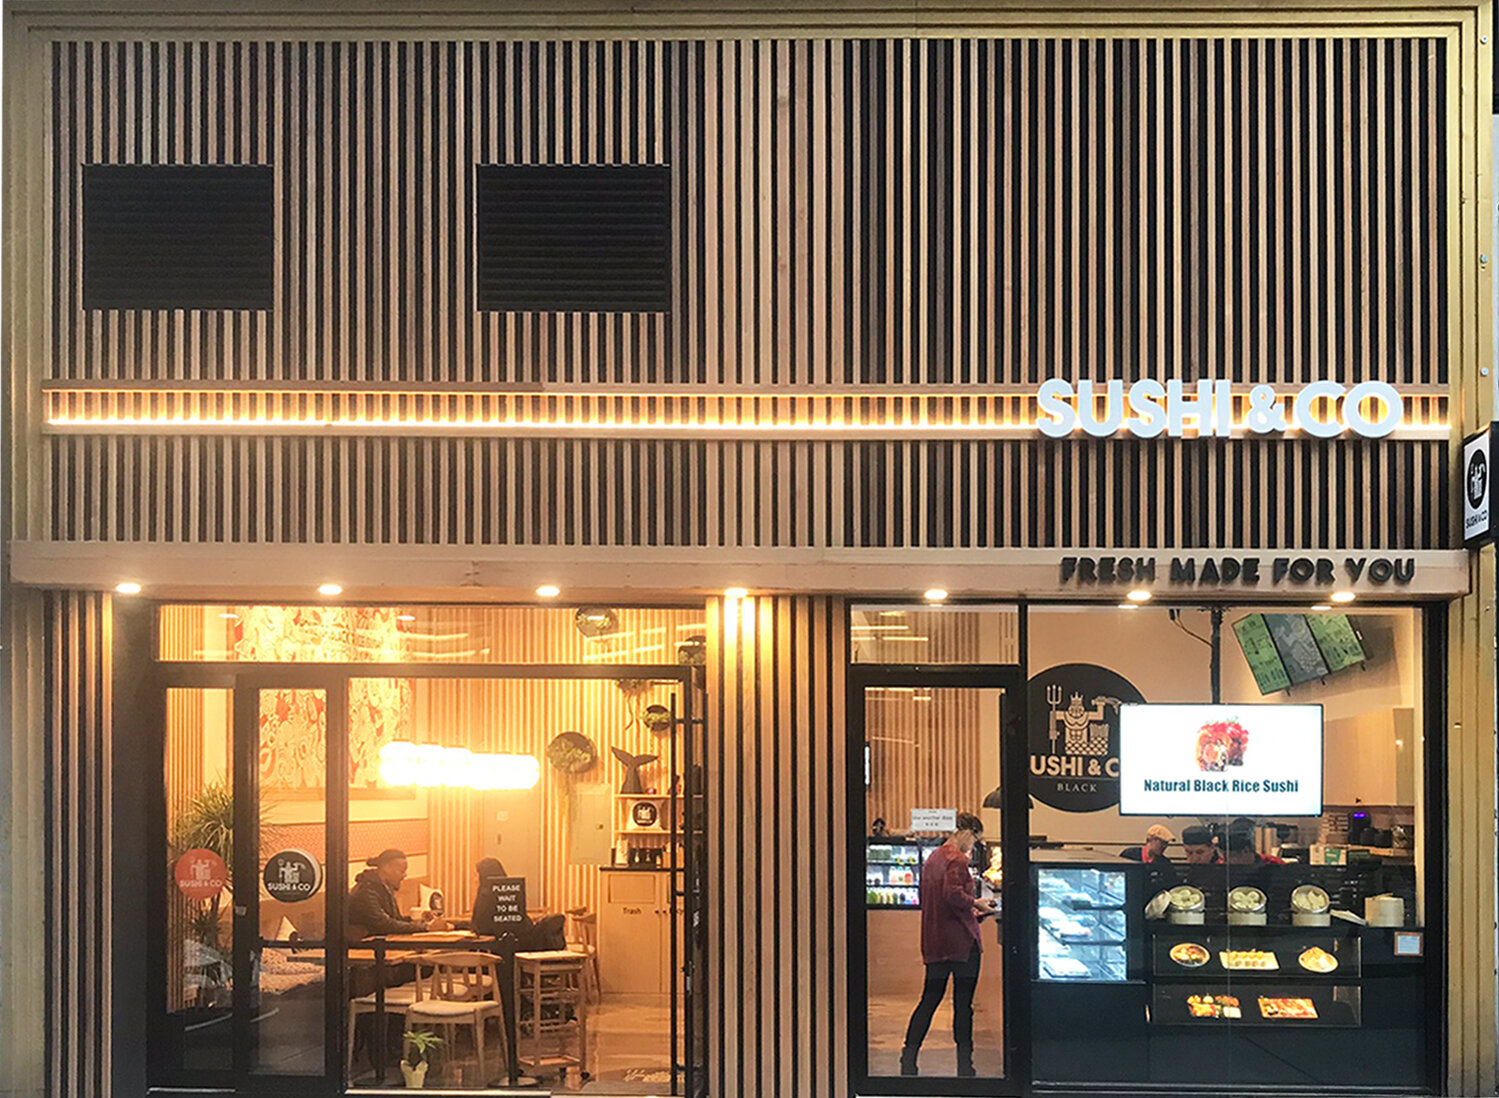 sushi & co store front.jpg